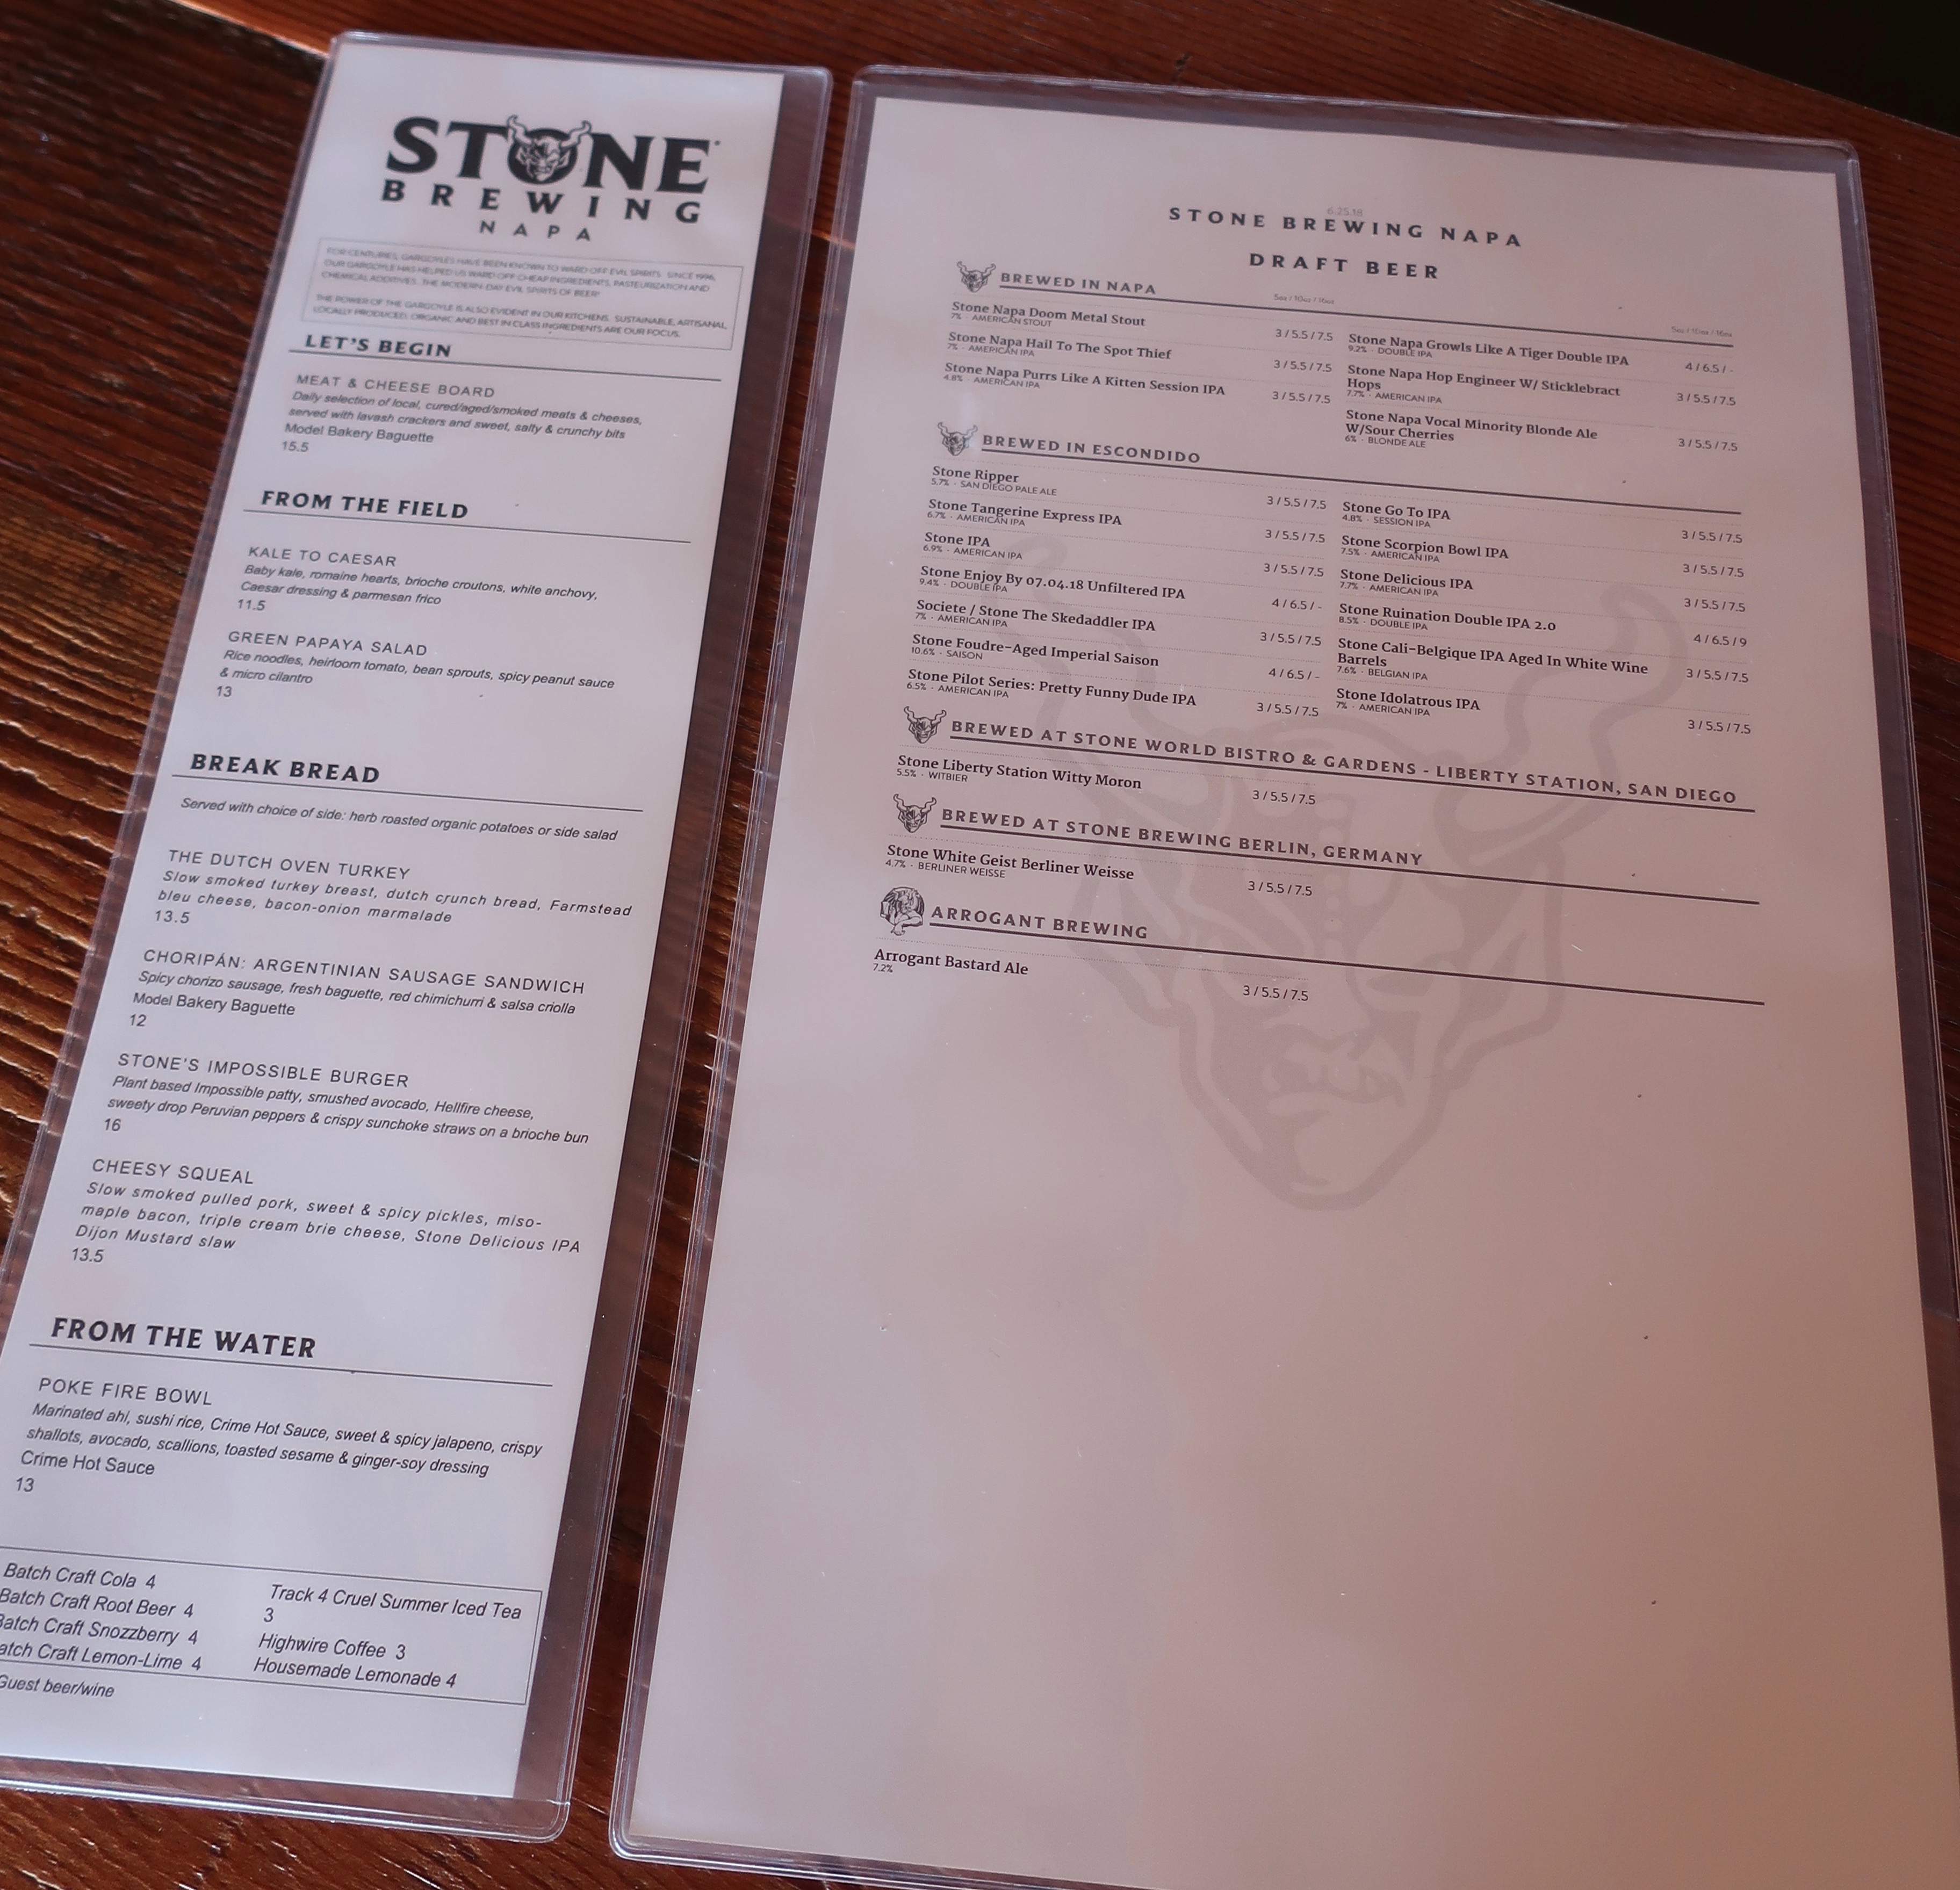 The menu during our visit to Stone Brewing - Napa.